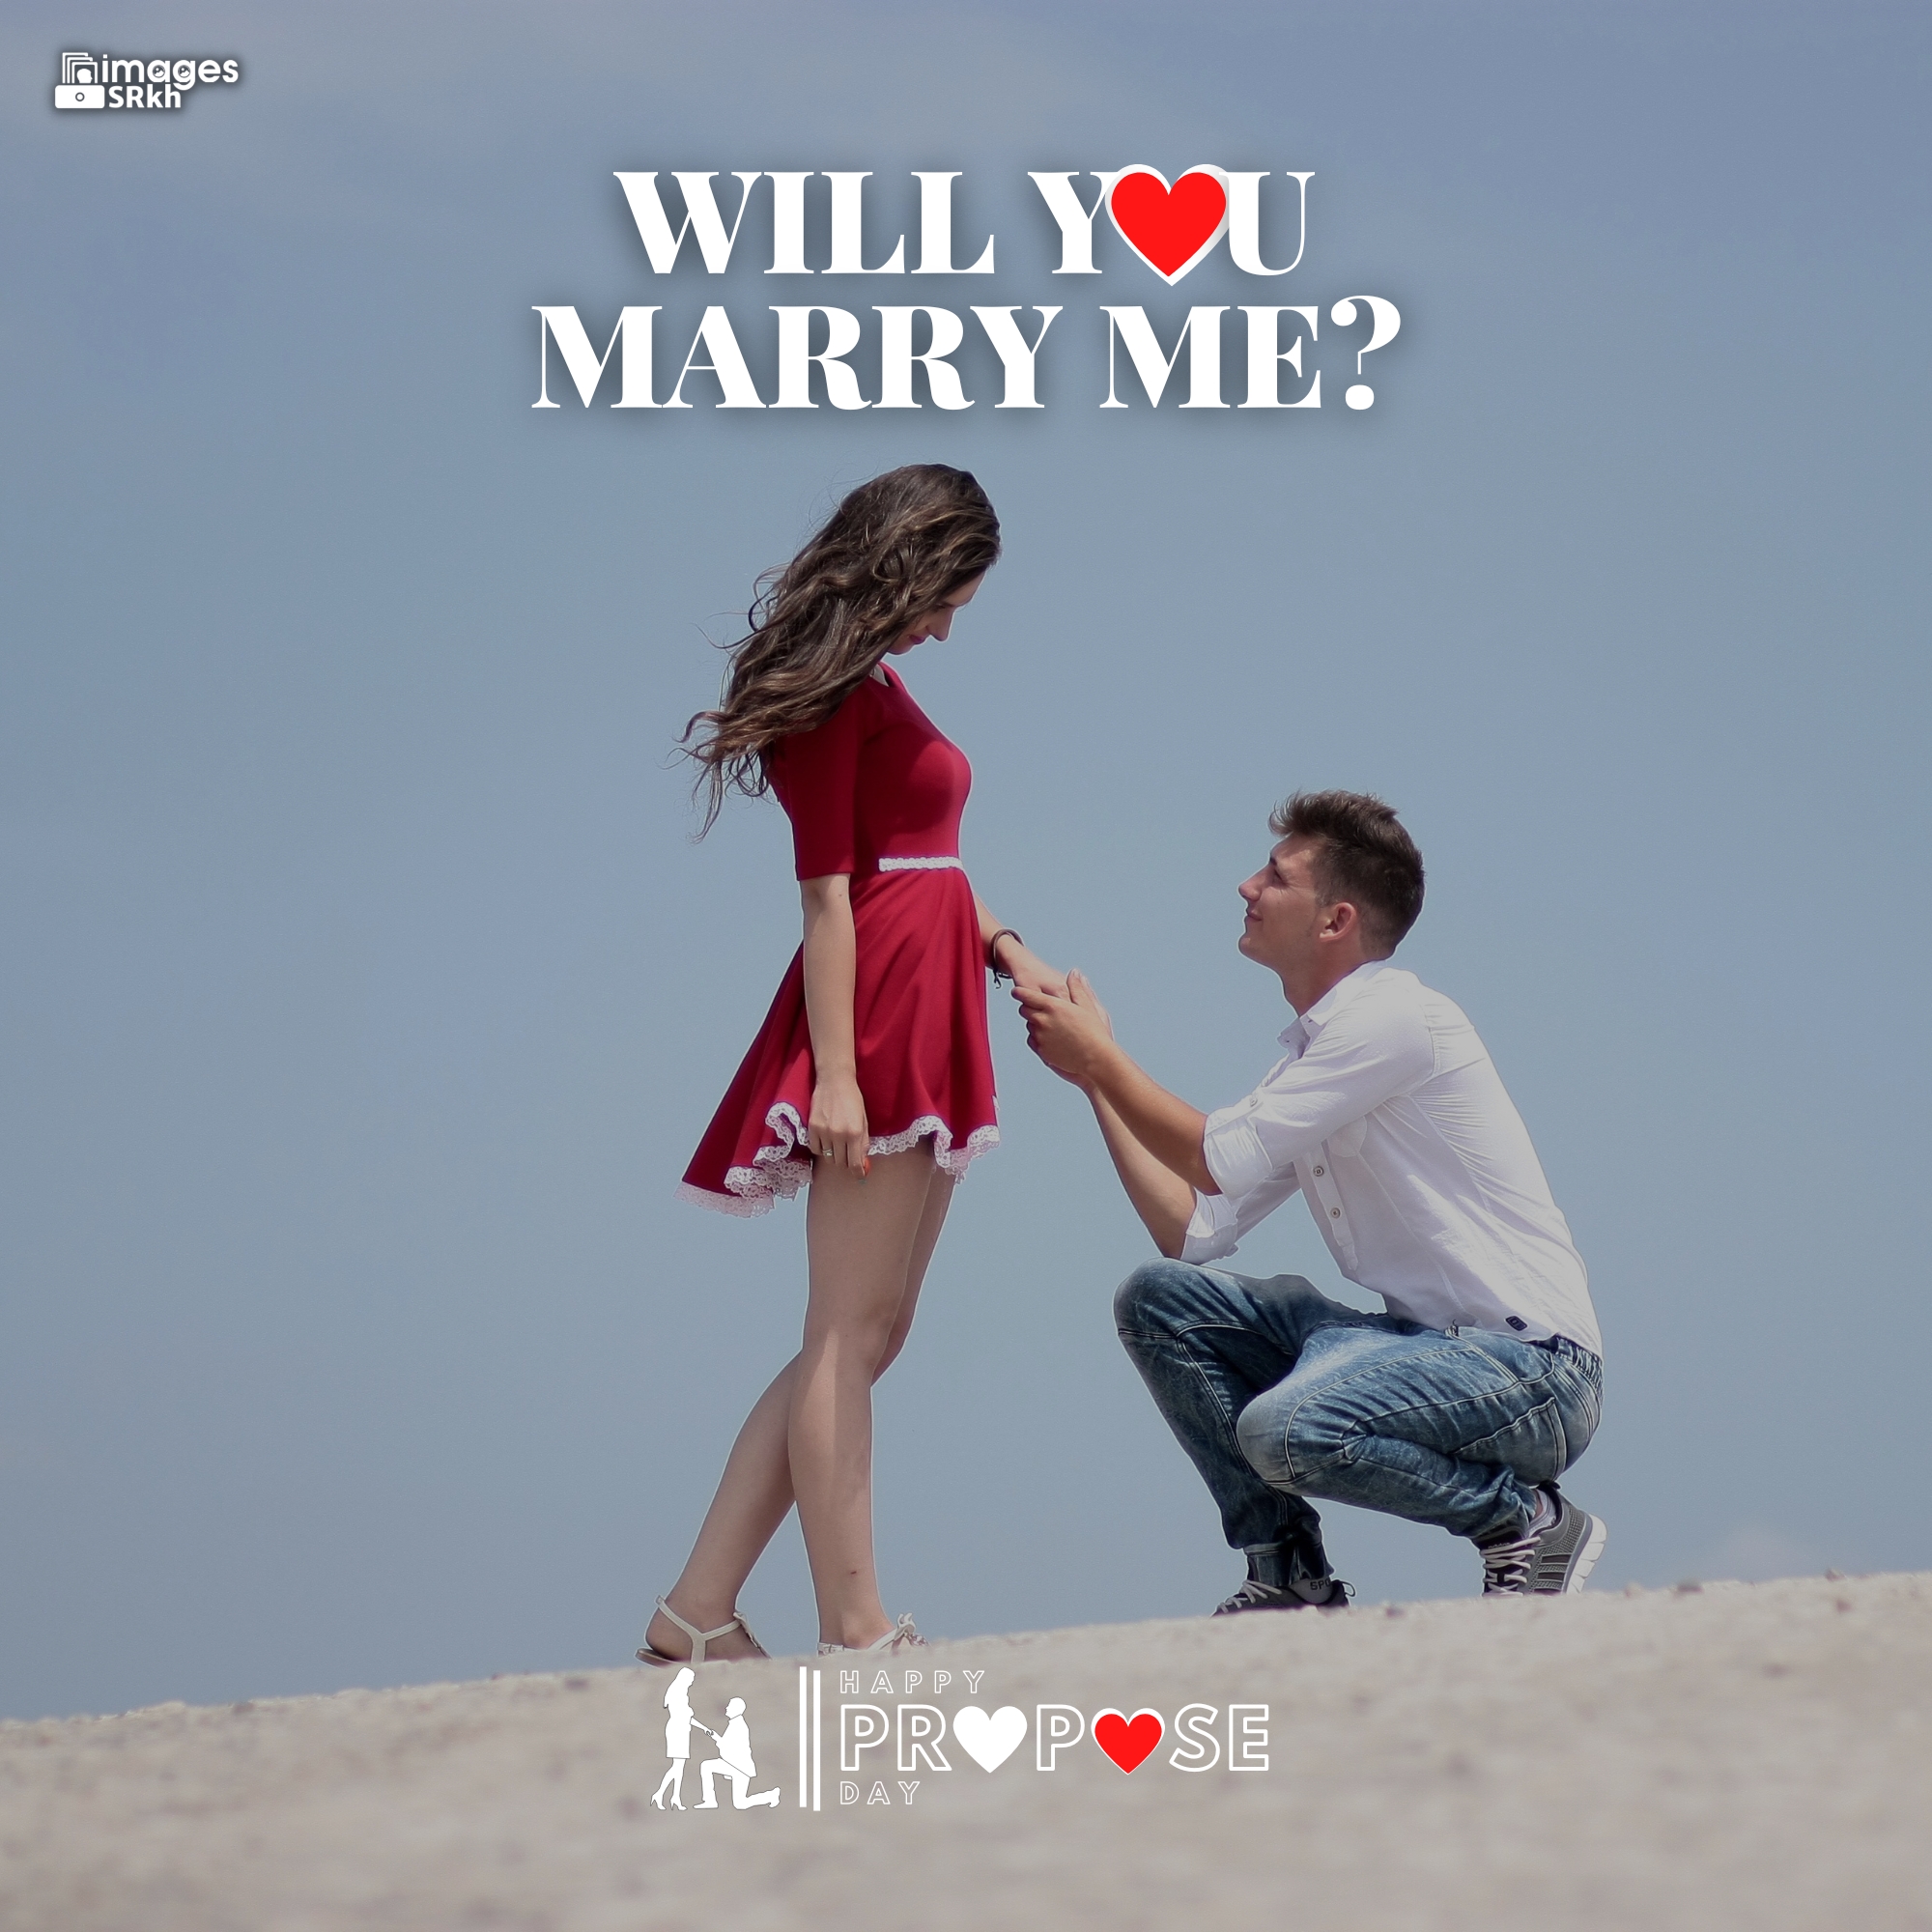 Propose Day Images | 280 | Will You MARRY ME